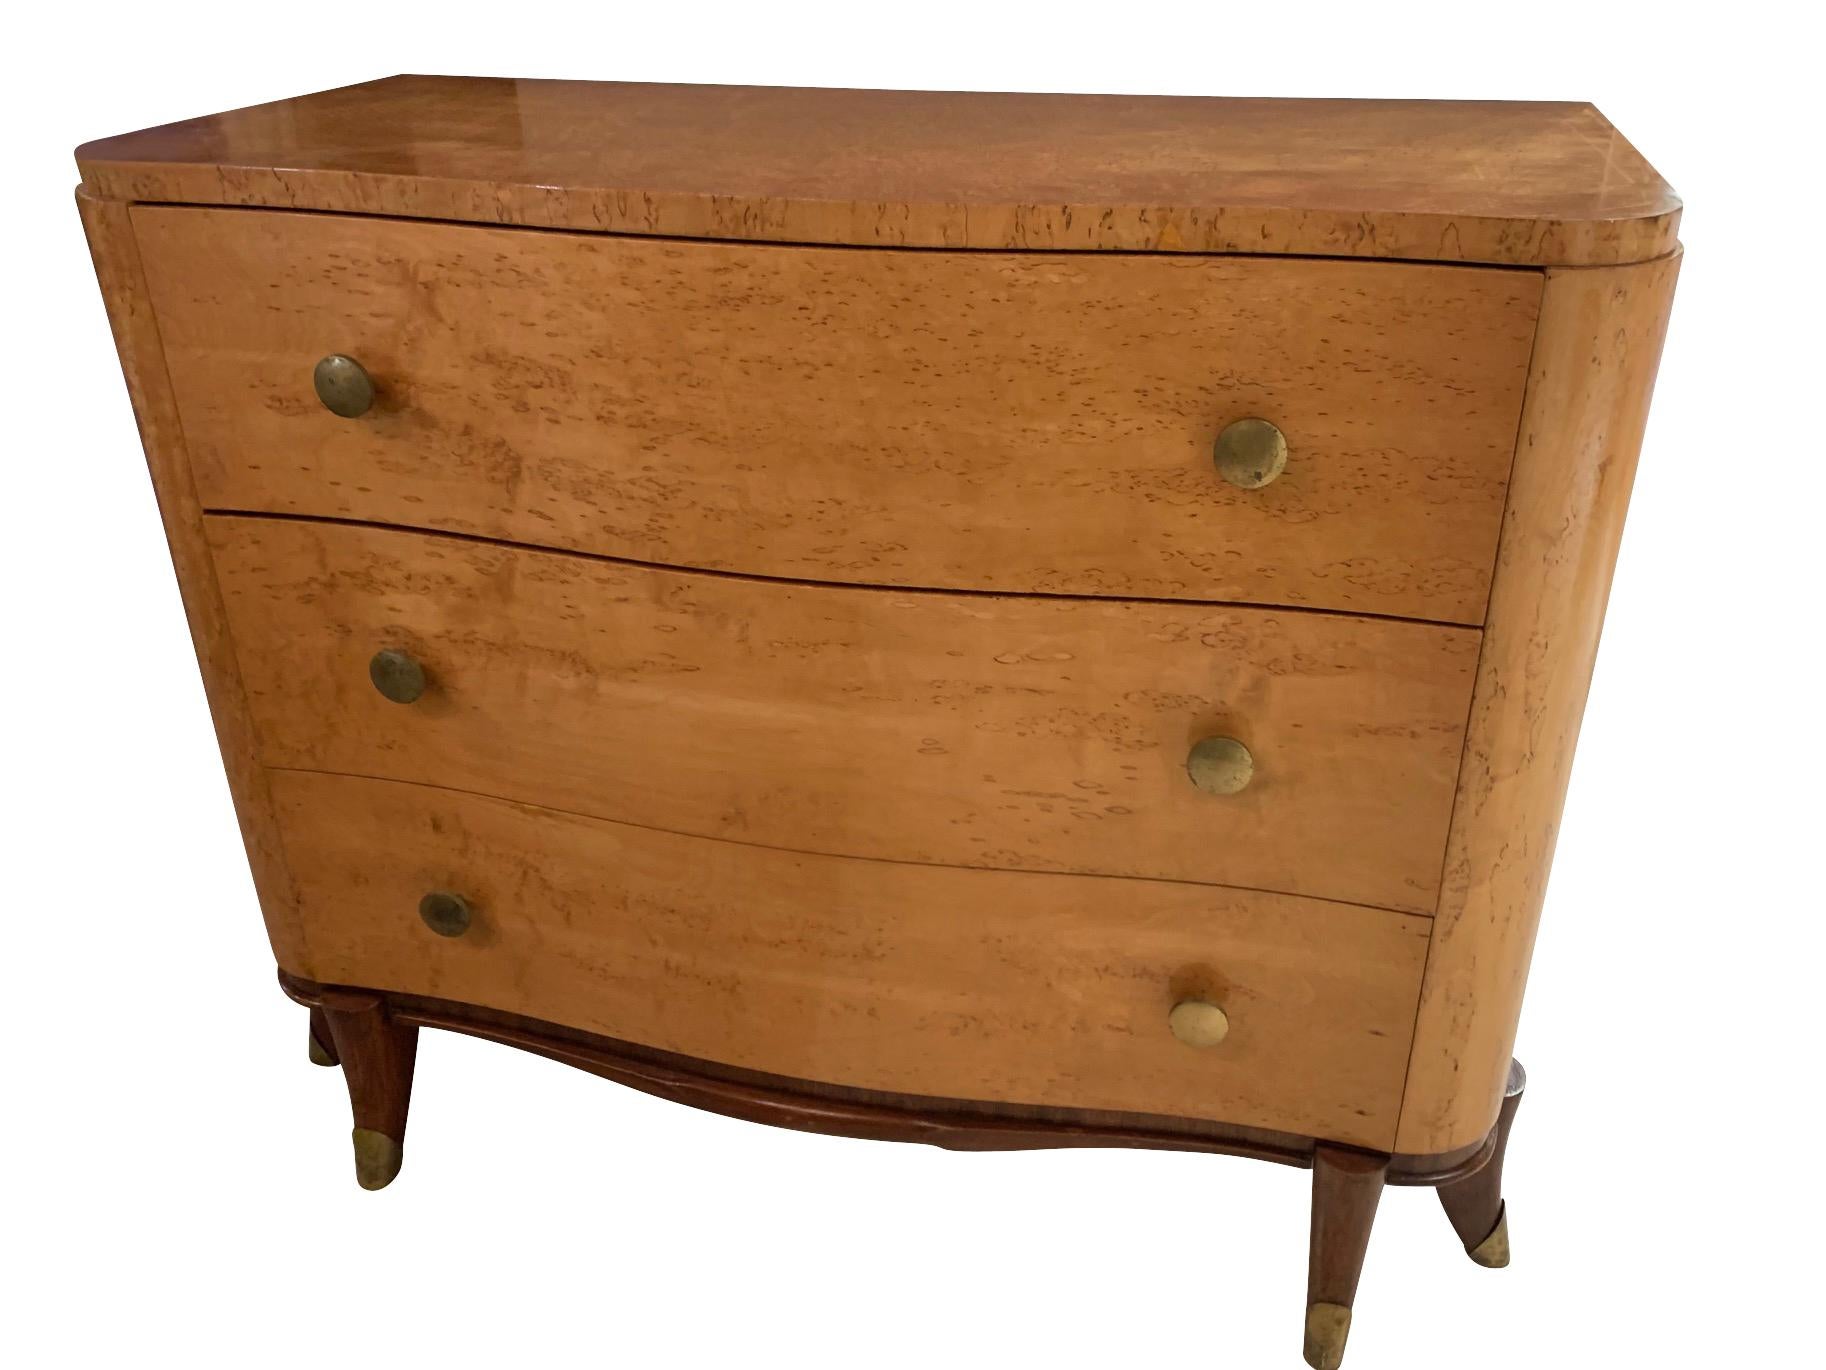 1930's French burled wood three drawer commode.
In the style of Jules Leleu.
Brass button style knobs.
Very unusual and decorative splayed front legs.
All with brass sabots.